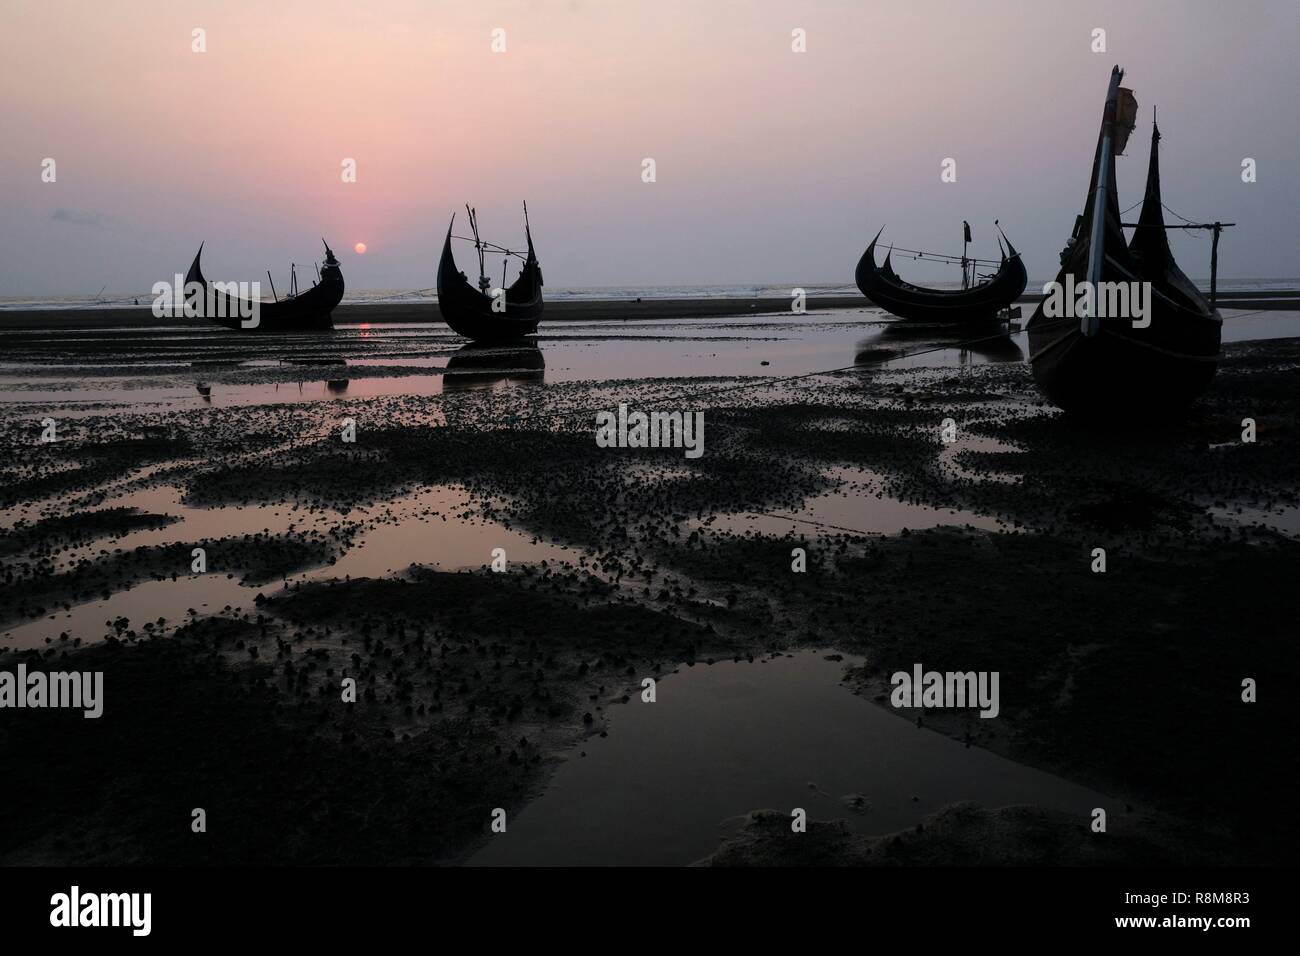 Bangladesh, Cox's Bazar, boats in the typical shape on the beach Stock Photo